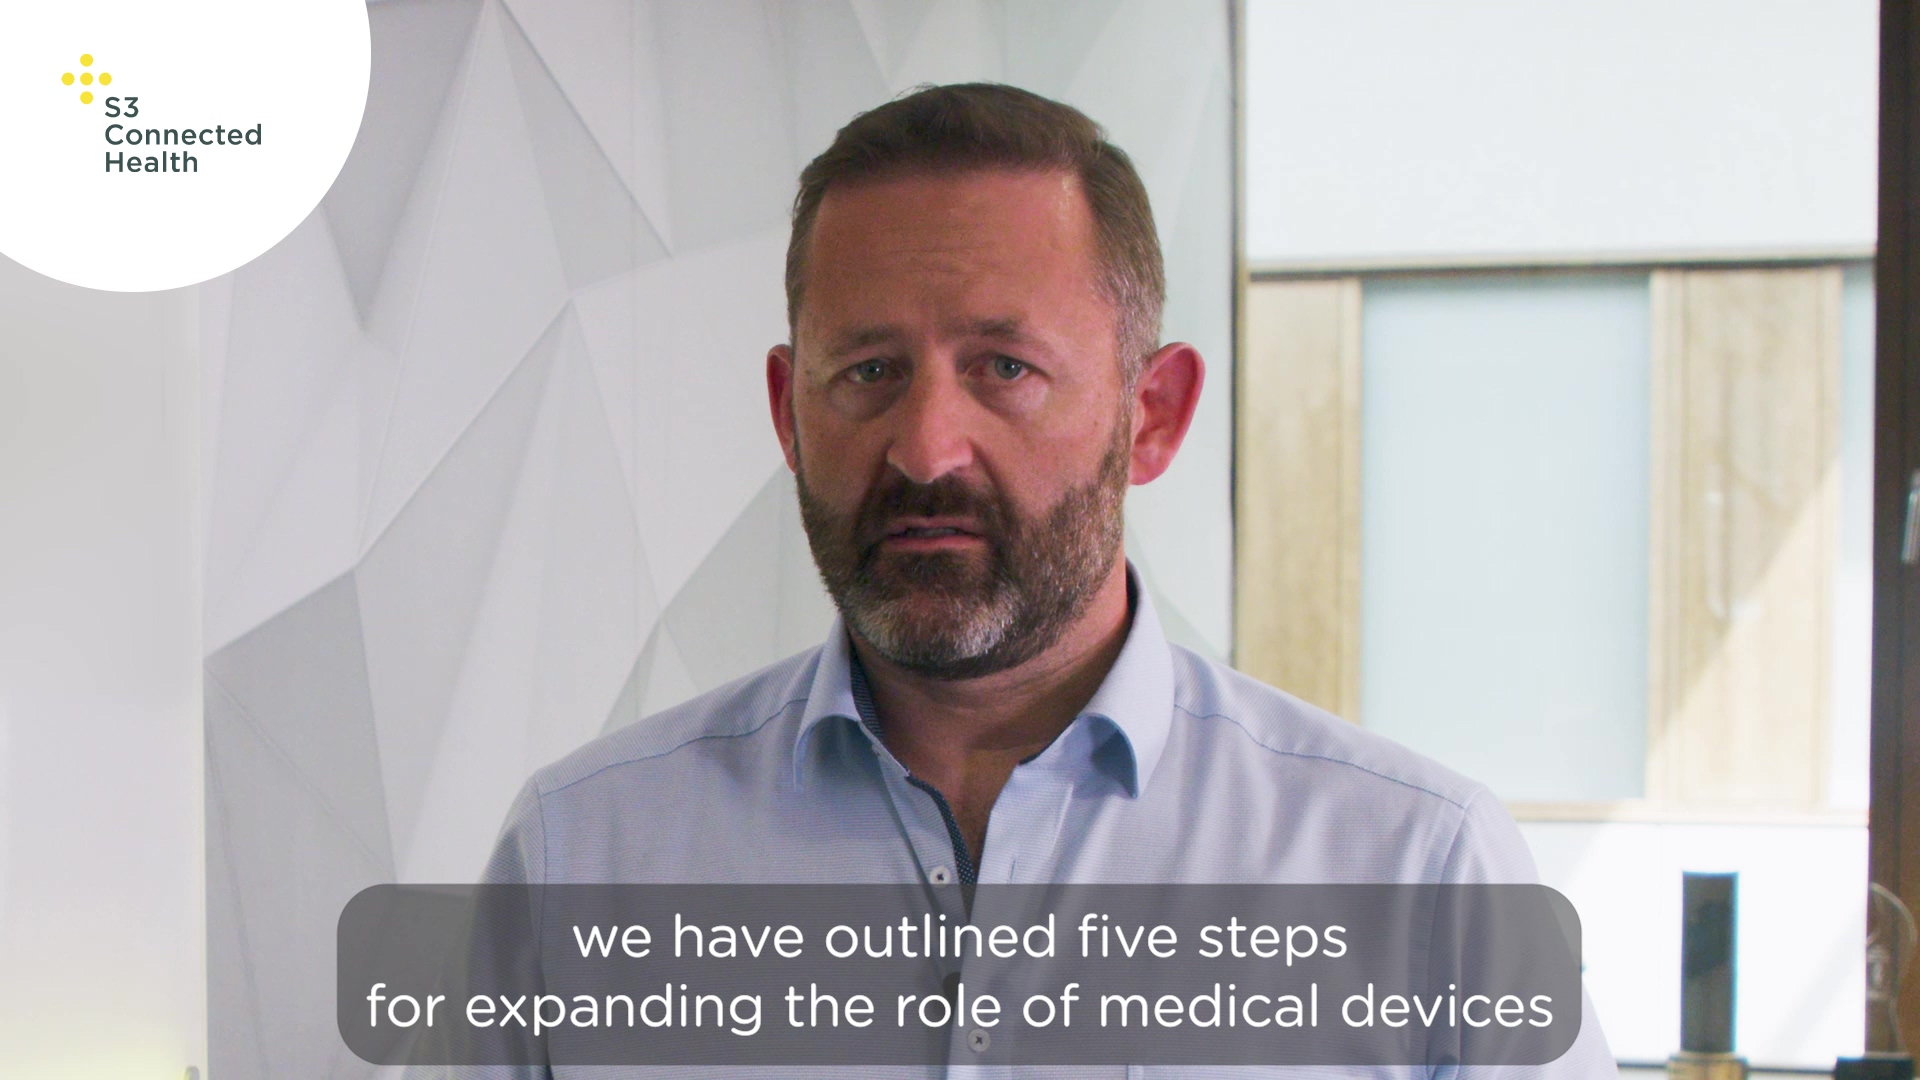 Expanding the value of medical devices in a digital world: Connectivity to continuity of care